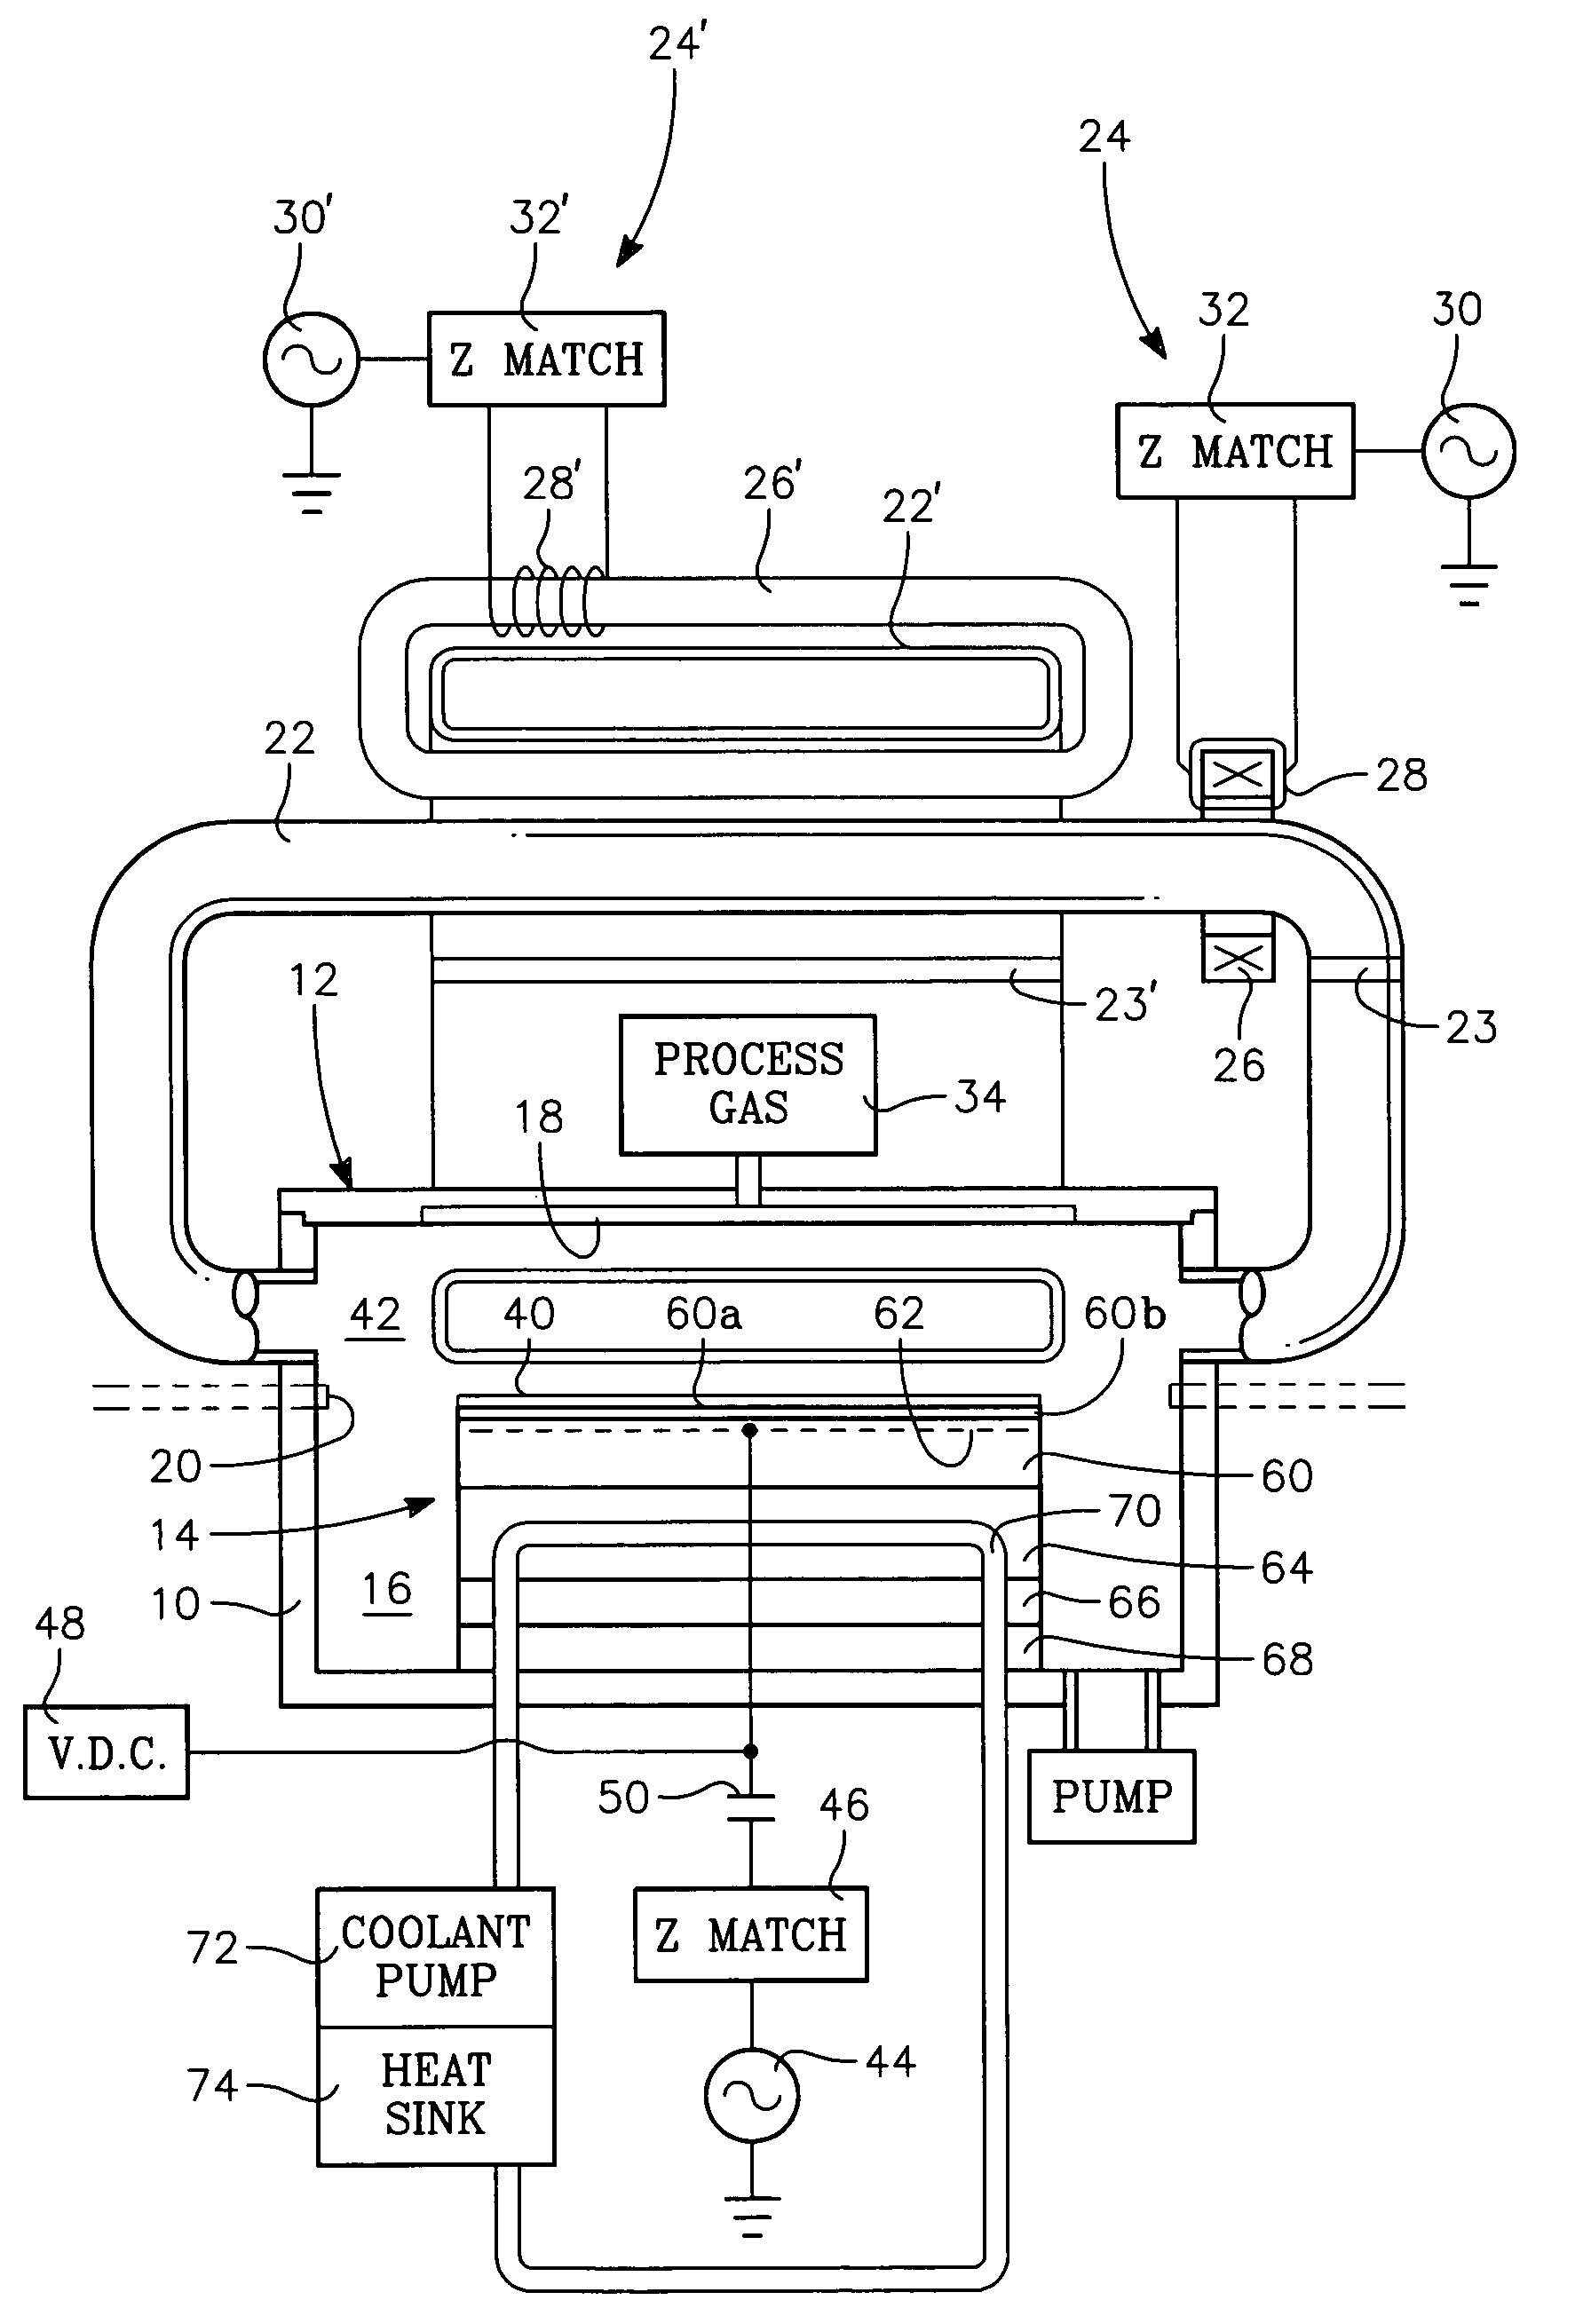 Low temperature plasma deposition process for carbon layer deposition